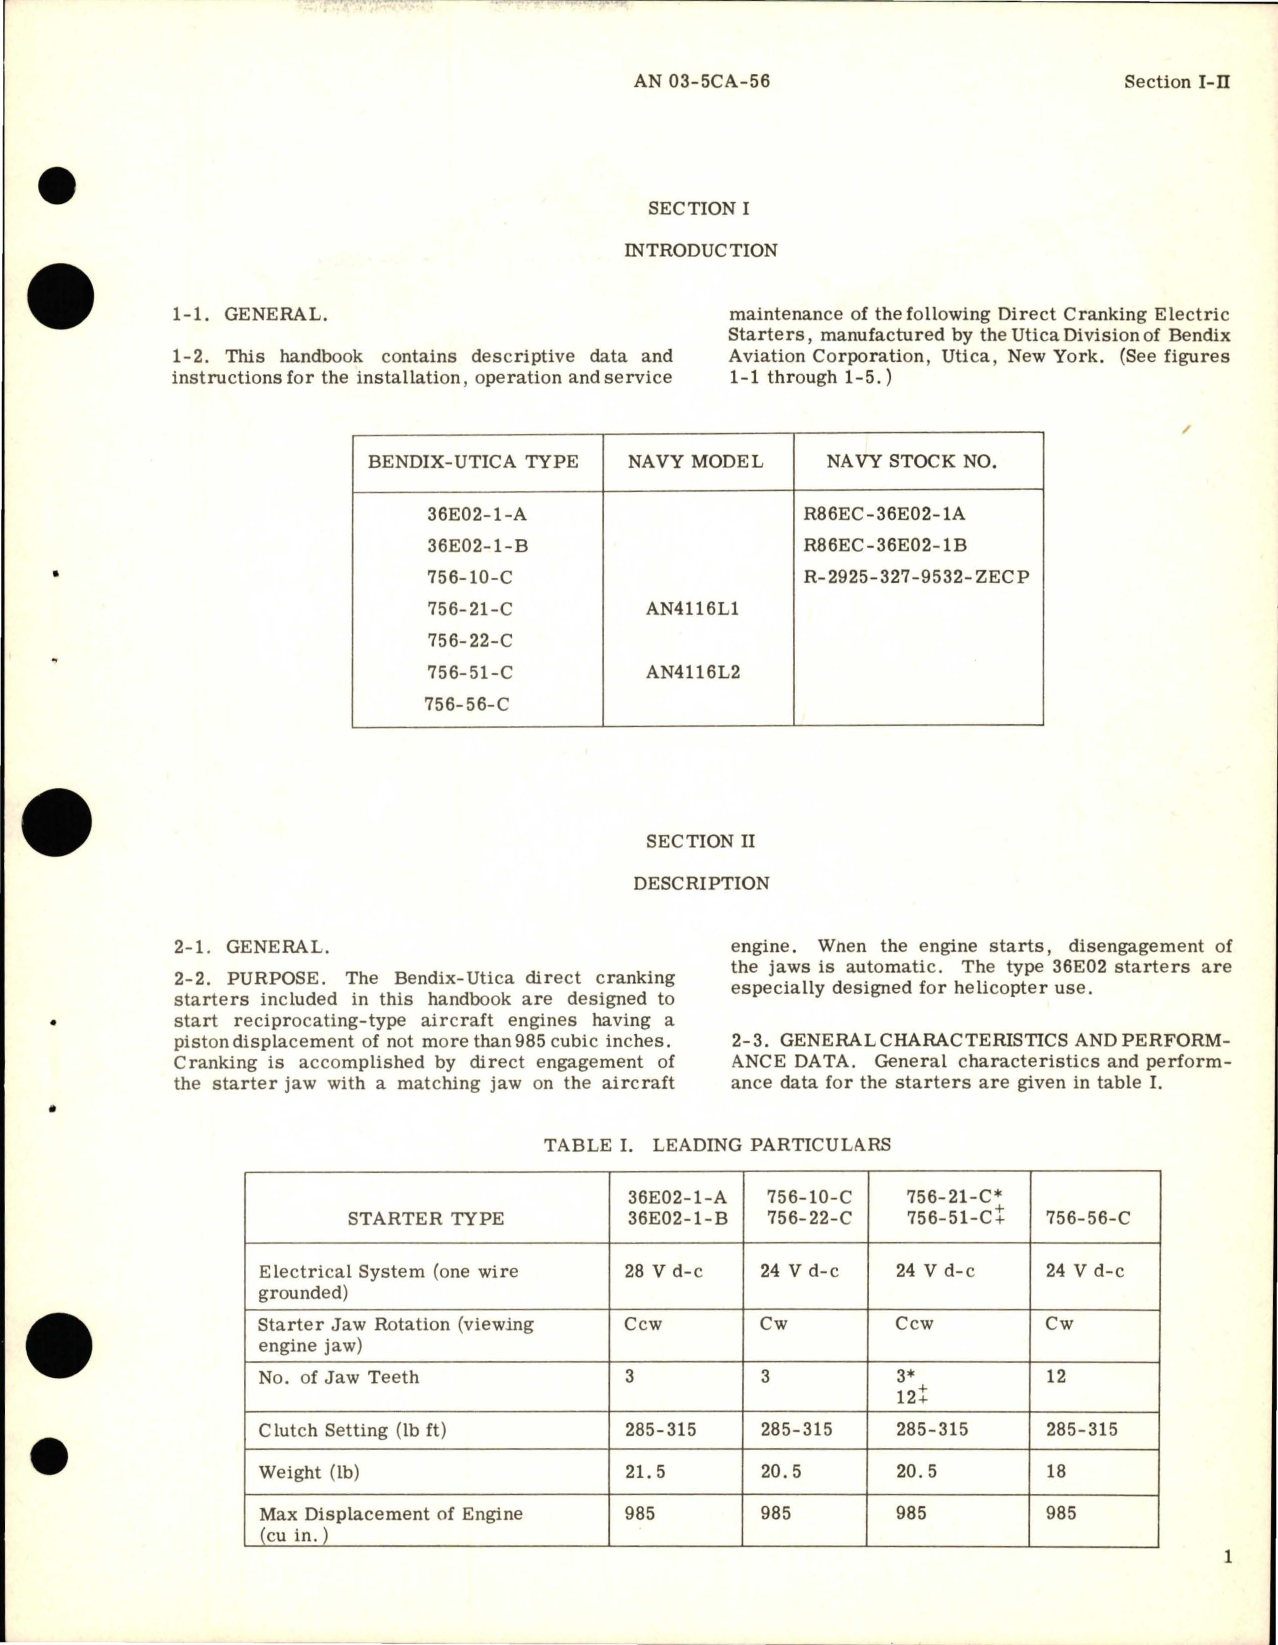 Sample page 5 from AirCorps Library document: Operation and Service Instructions for Direct Cranking Electric Starters 